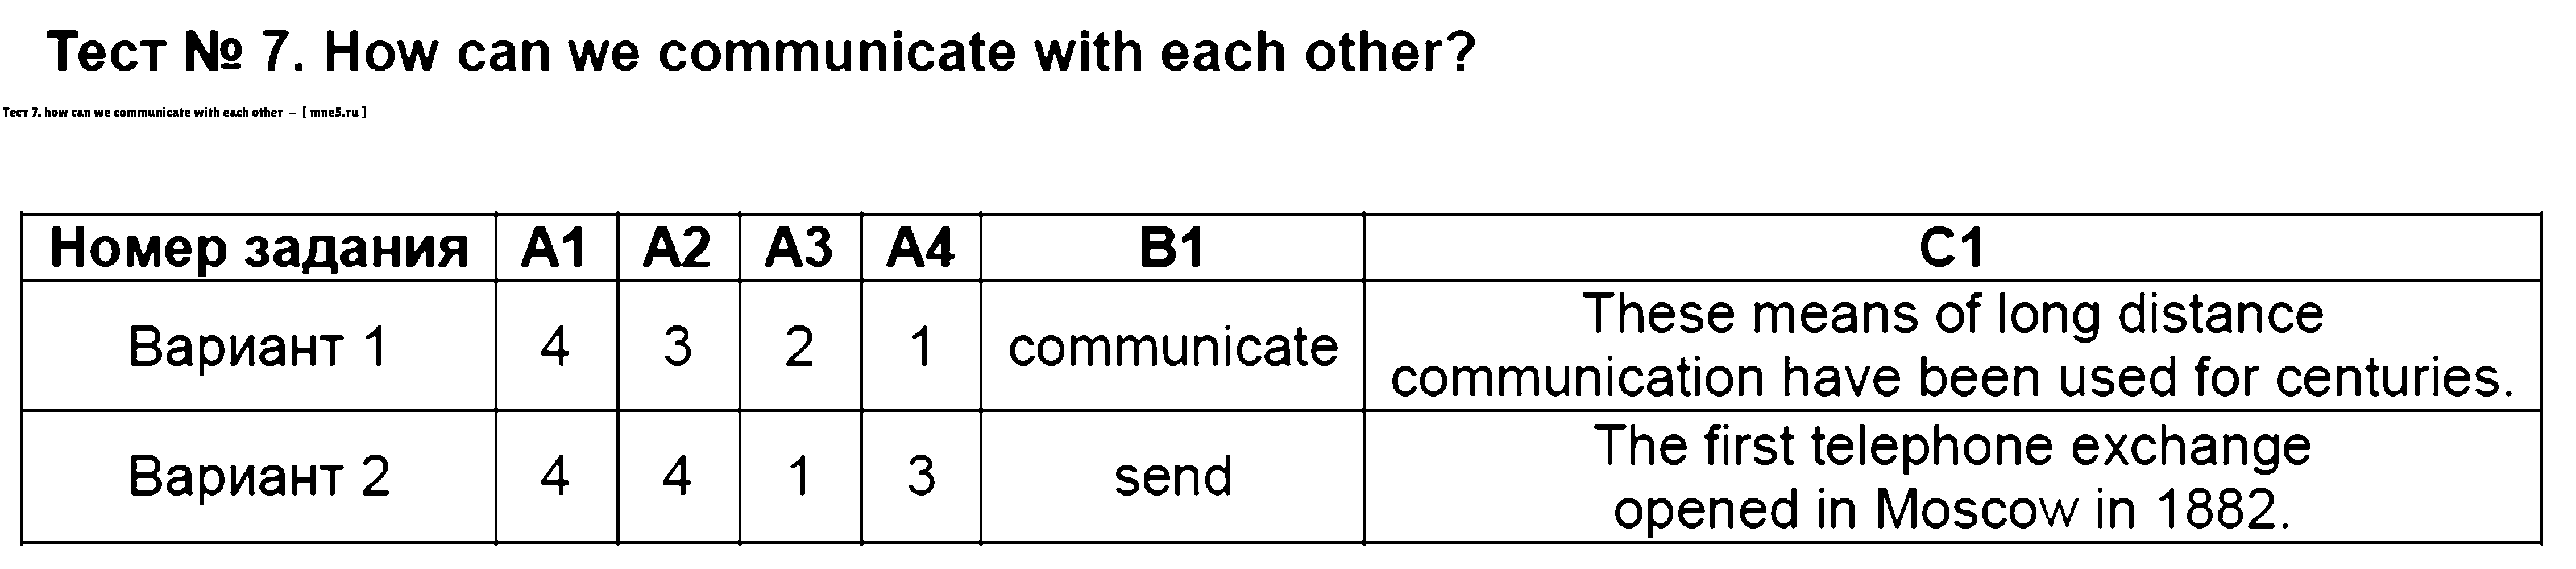 ГДЗ Английский 7 класс - Тест 7. how can we communicate with each other